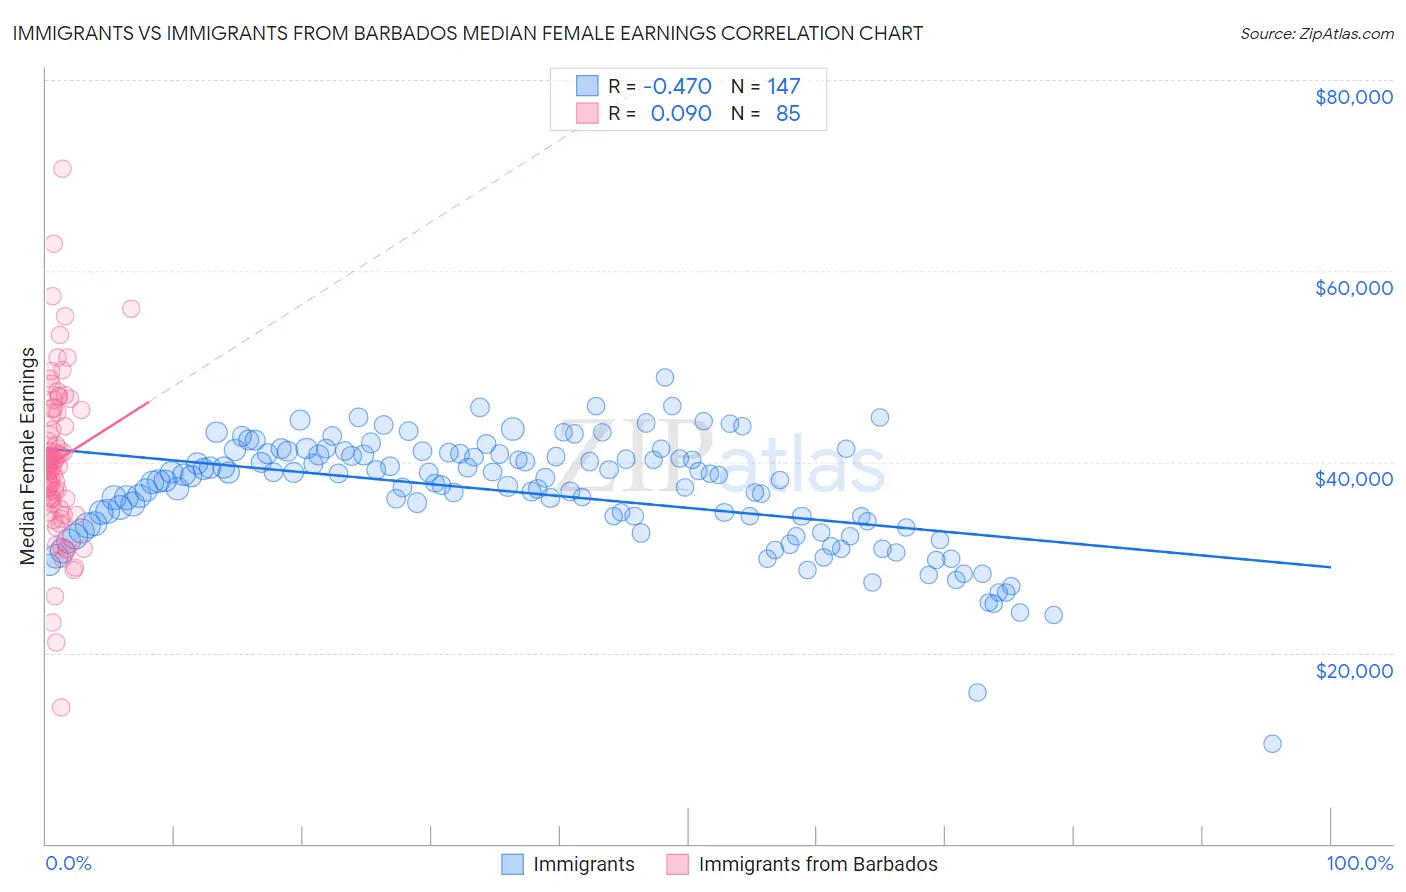 Immigrants vs Immigrants from Barbados Median Female Earnings